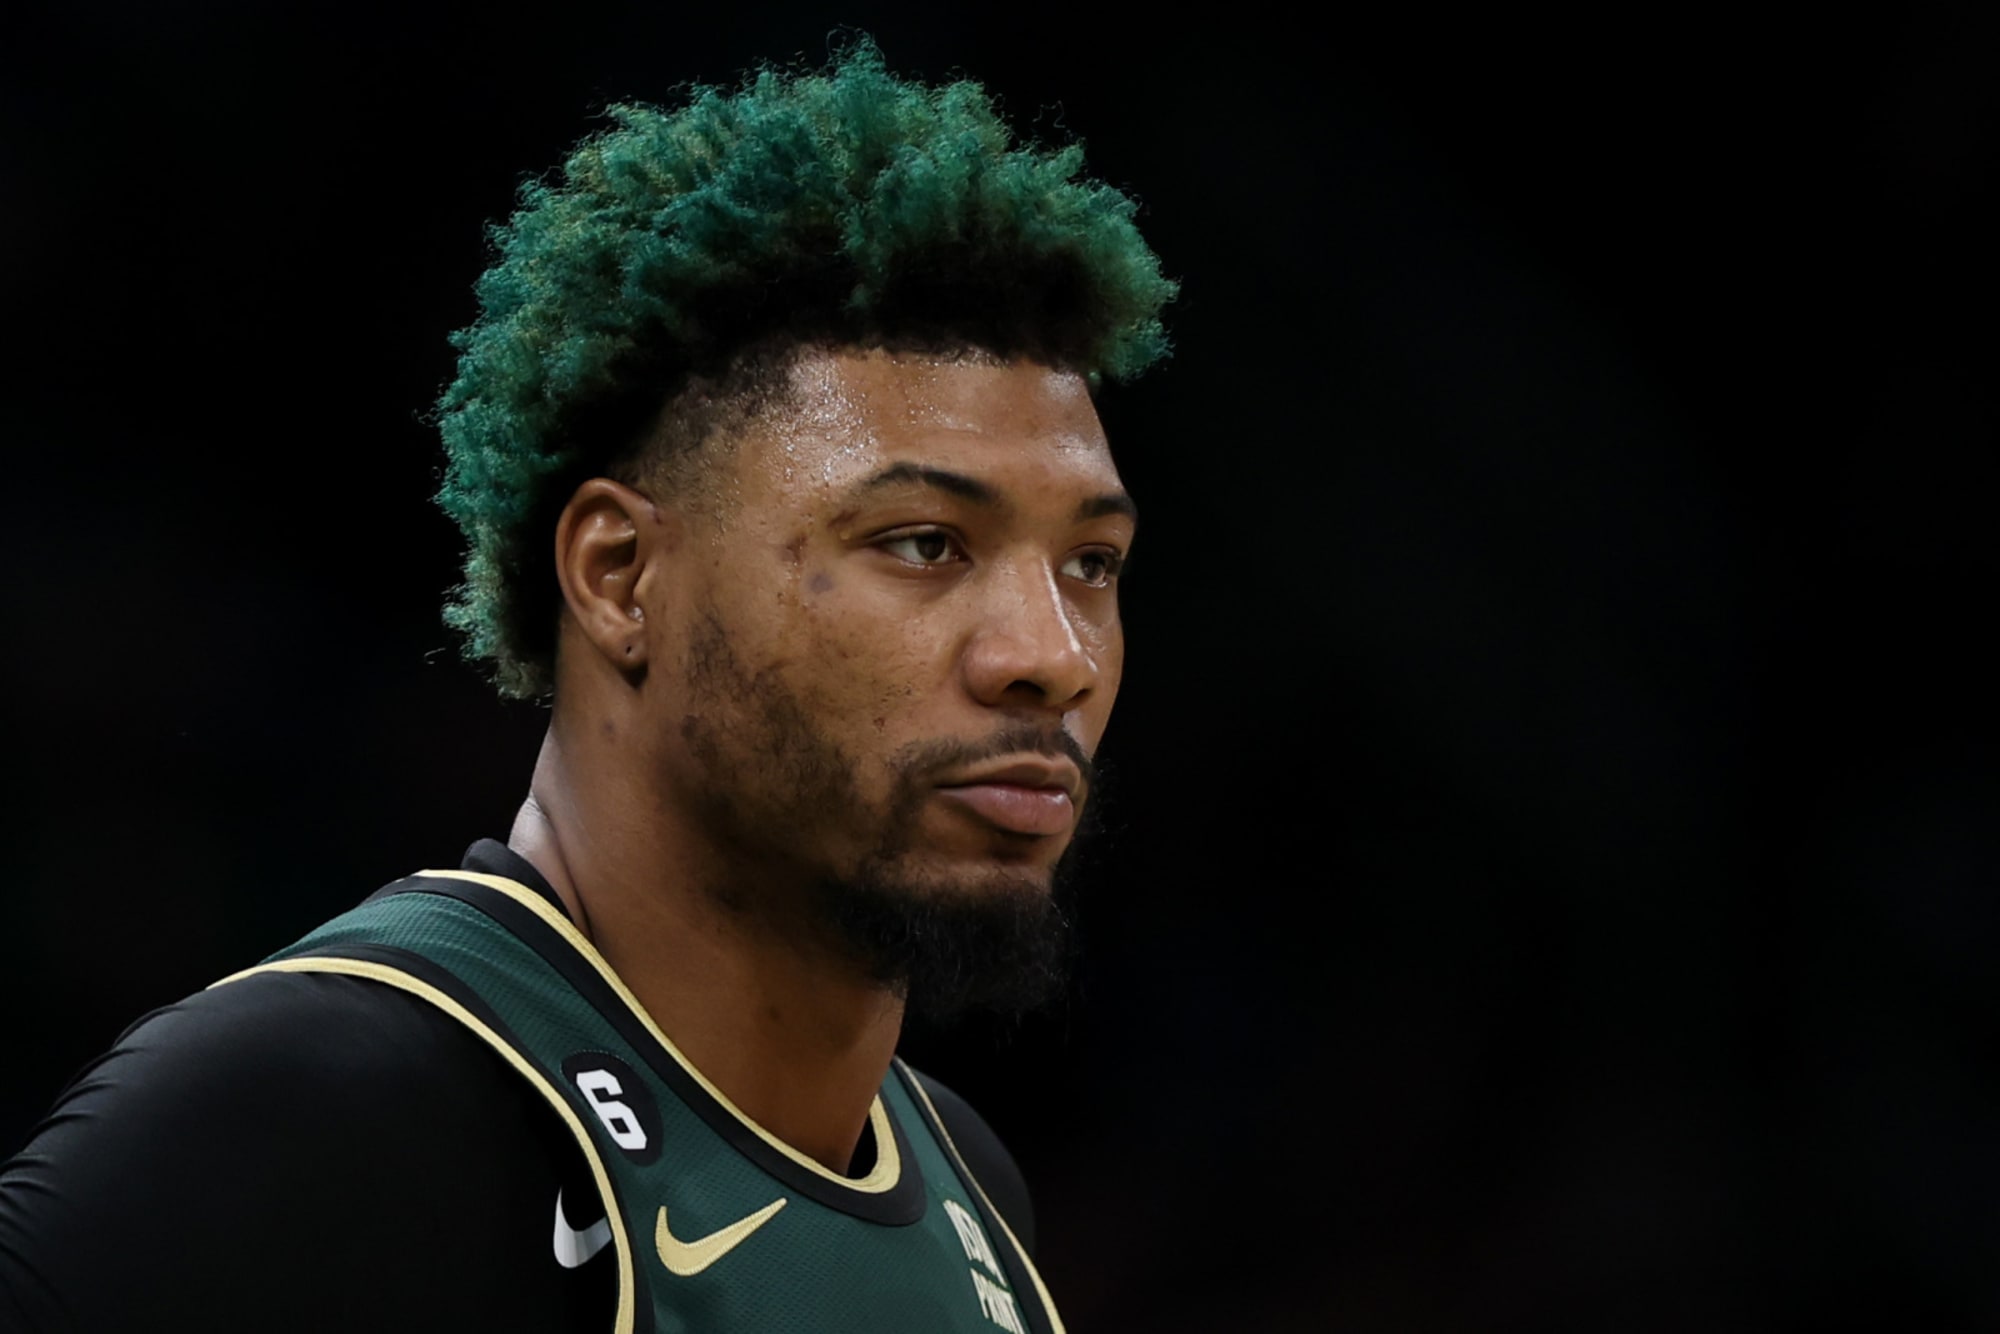 Grizzlies: First glimpse at Marcus Smart in Memphis gear [LOOK]